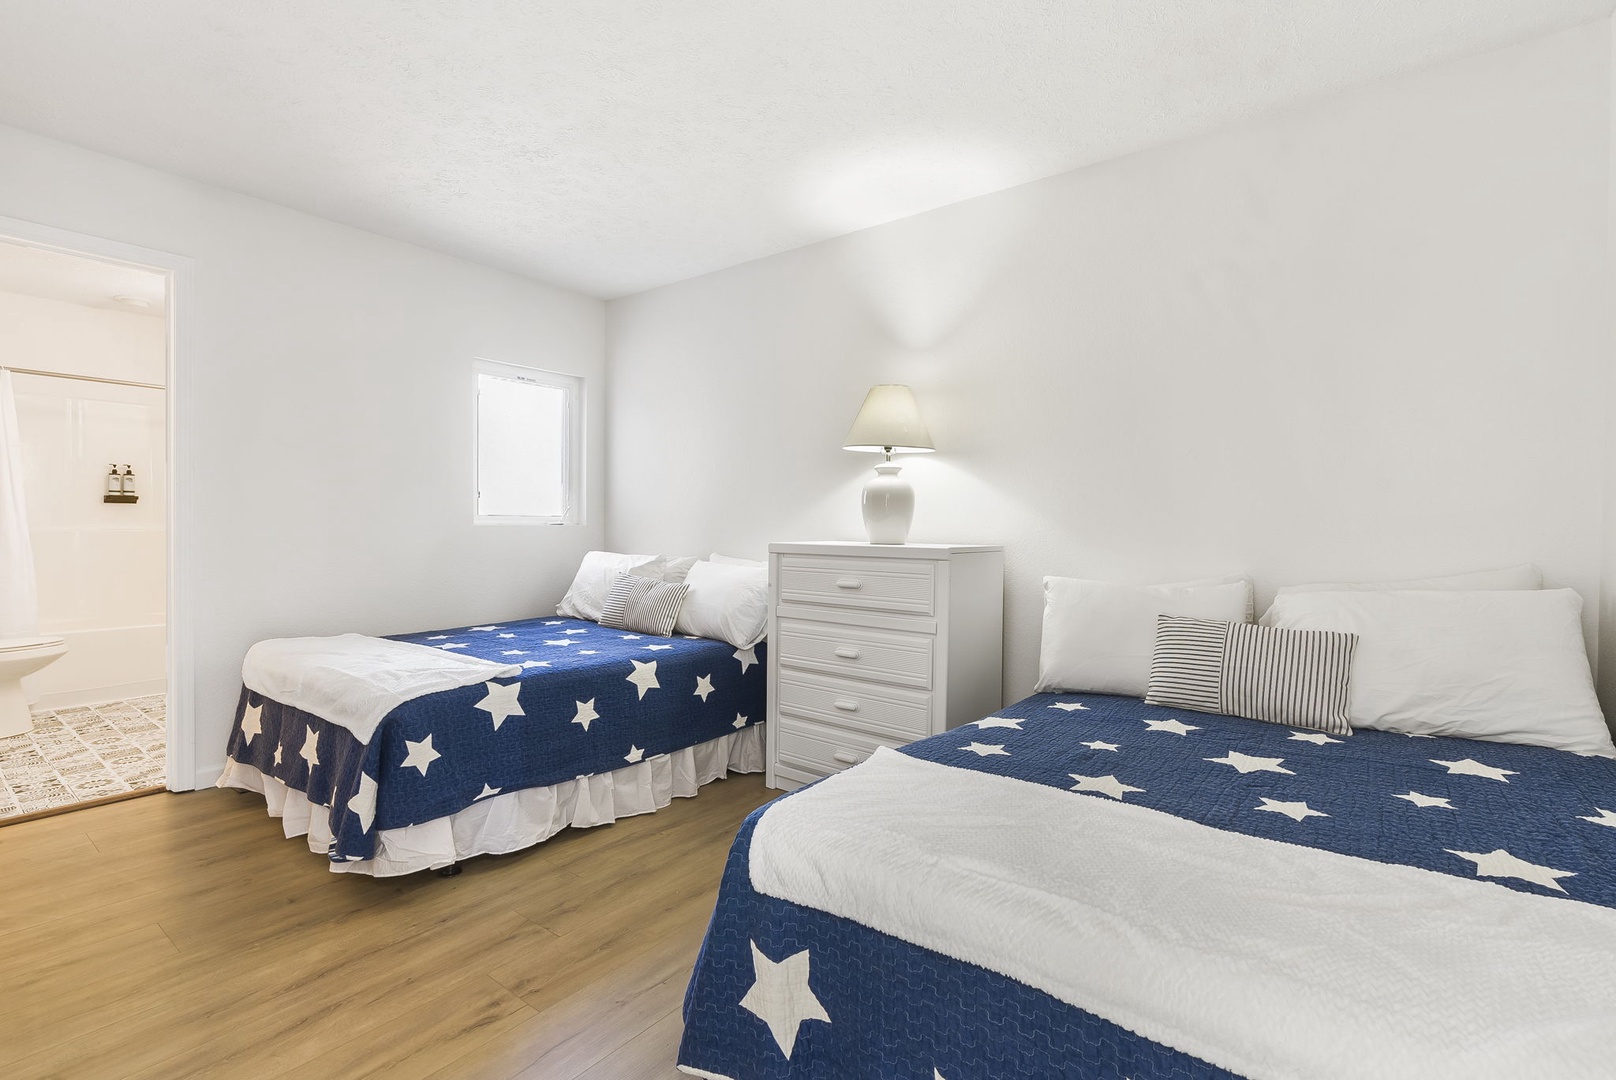 Unit 43: This 2nd floor suite offers a pair of full-sized beds & private en suite